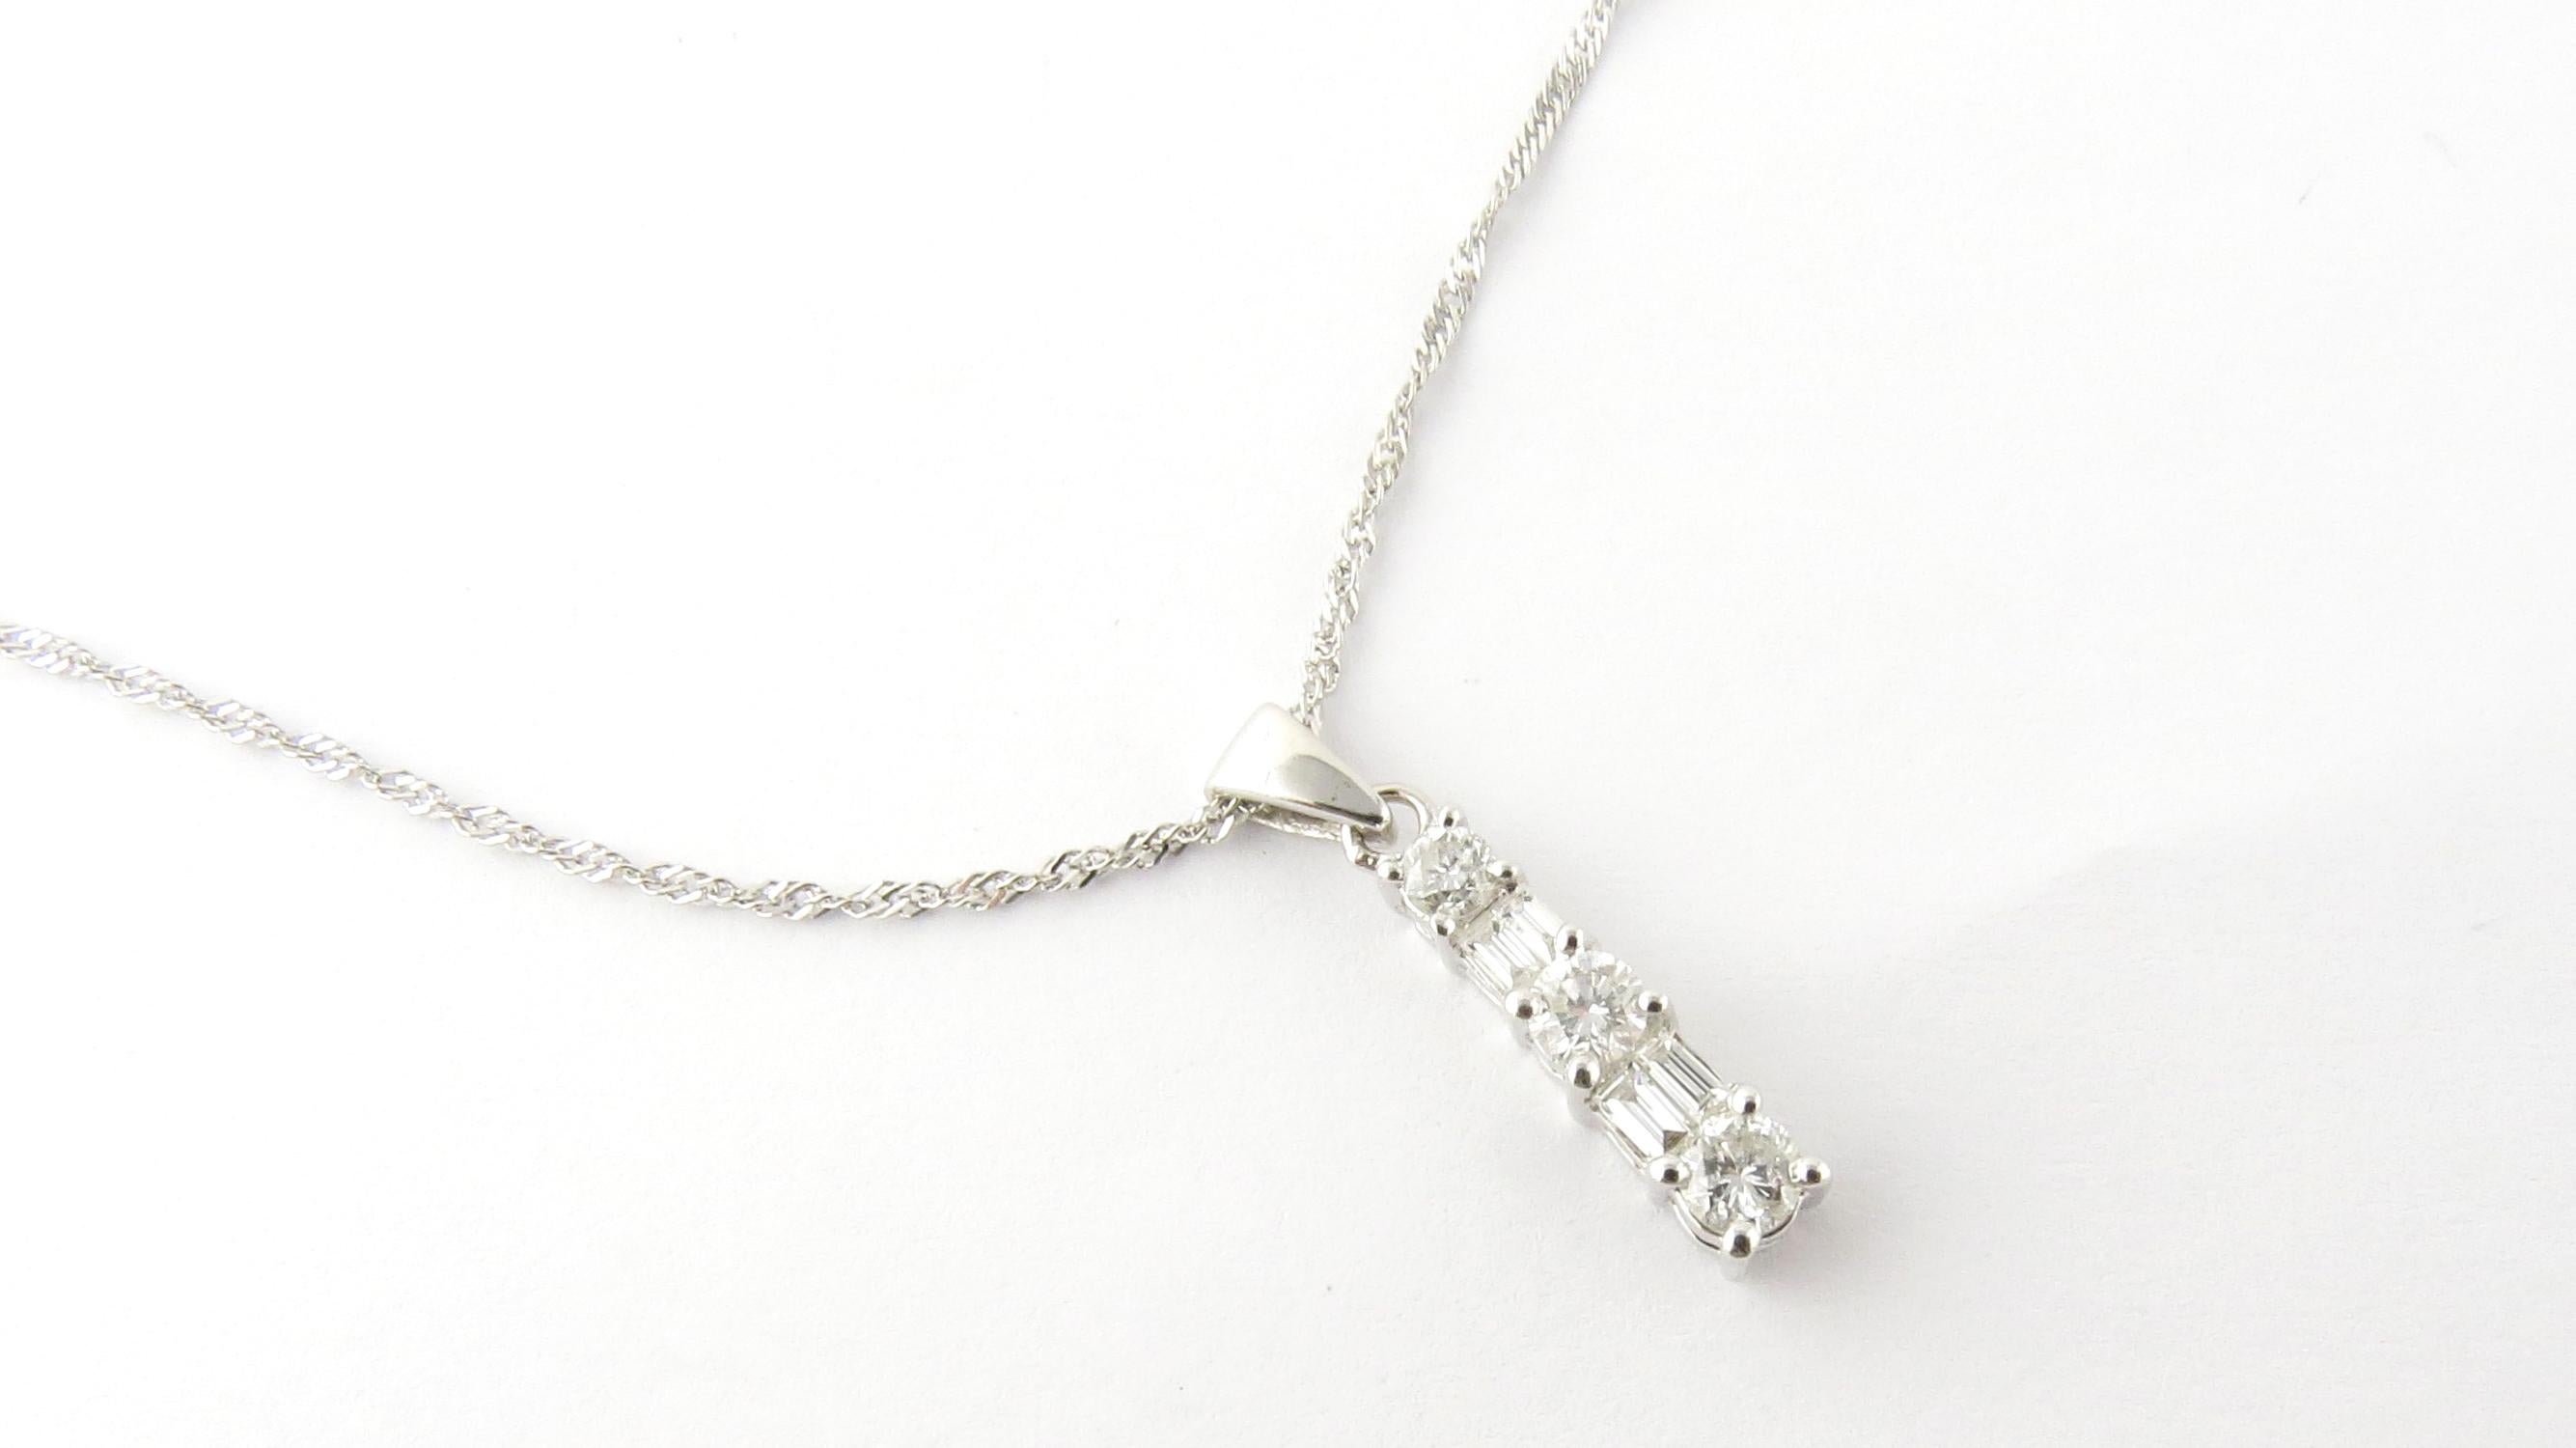 Vintage 14 Karat White Gold and Diamond Pendant Necklace

This sparkling pendant features three round brilliant cut diamonds (.30 ct. twt.) and four baguette diamonds (.14 ct. twt.) set in classic 14K white gold. Suspended from a lovely 14K